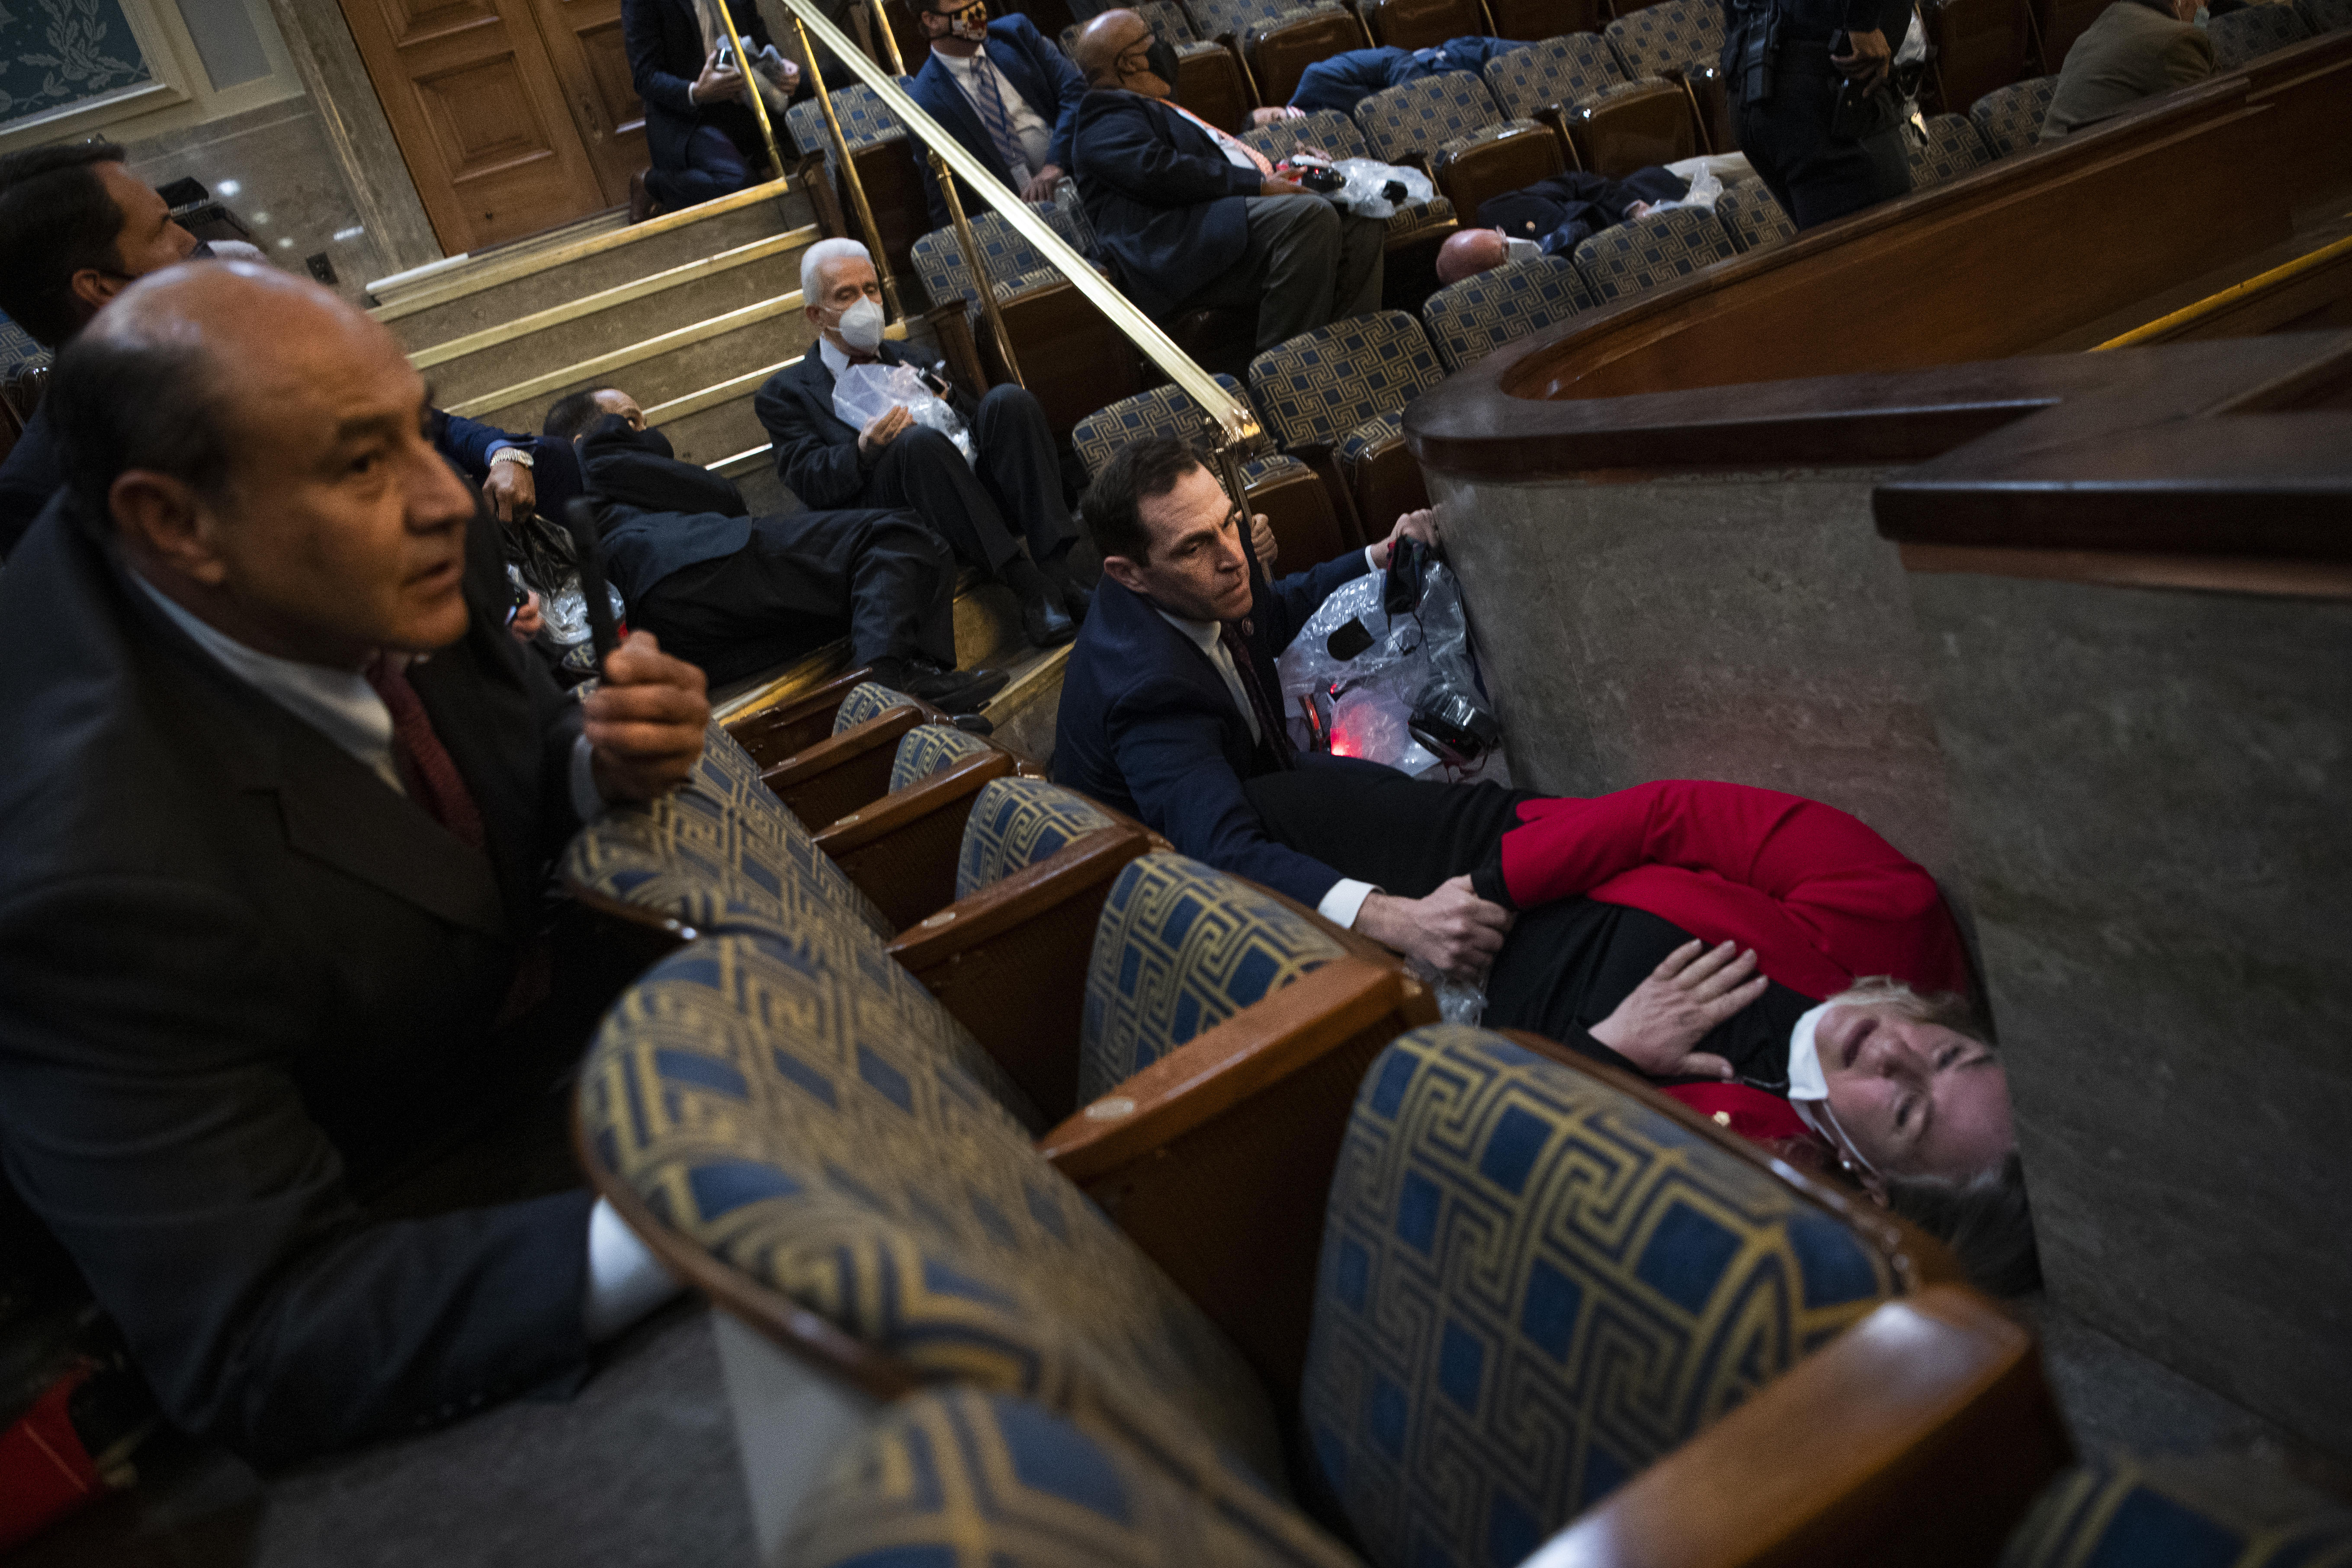 Lawmakers in dramatic photo of Capitol siege recount scene 